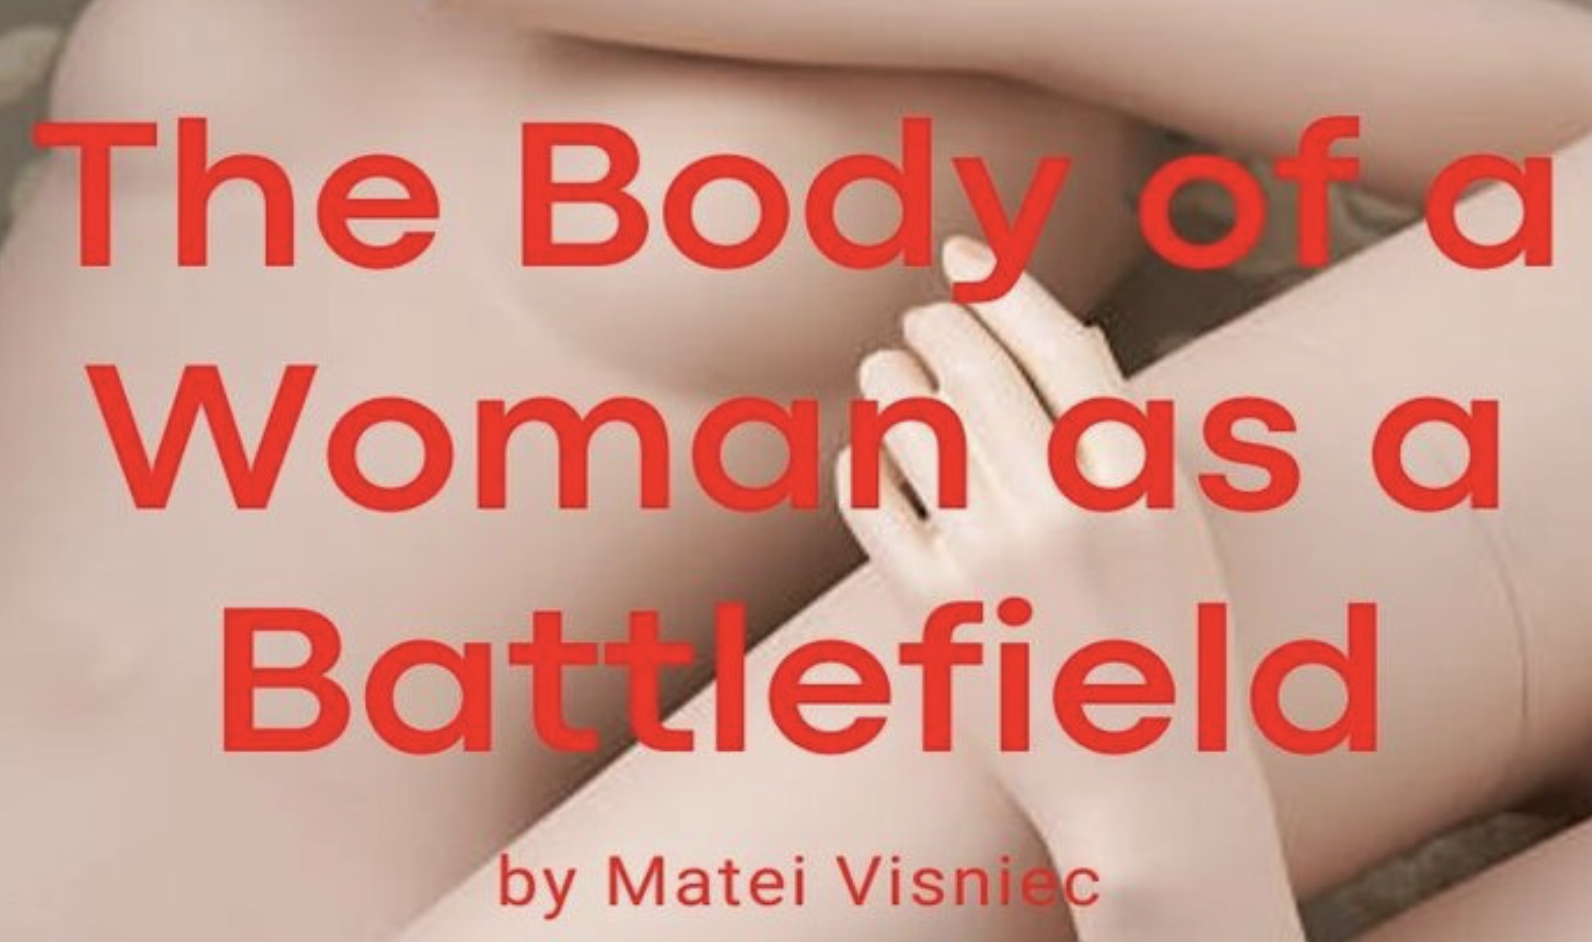 Final Show of The Body of a Woman as a Battlefield